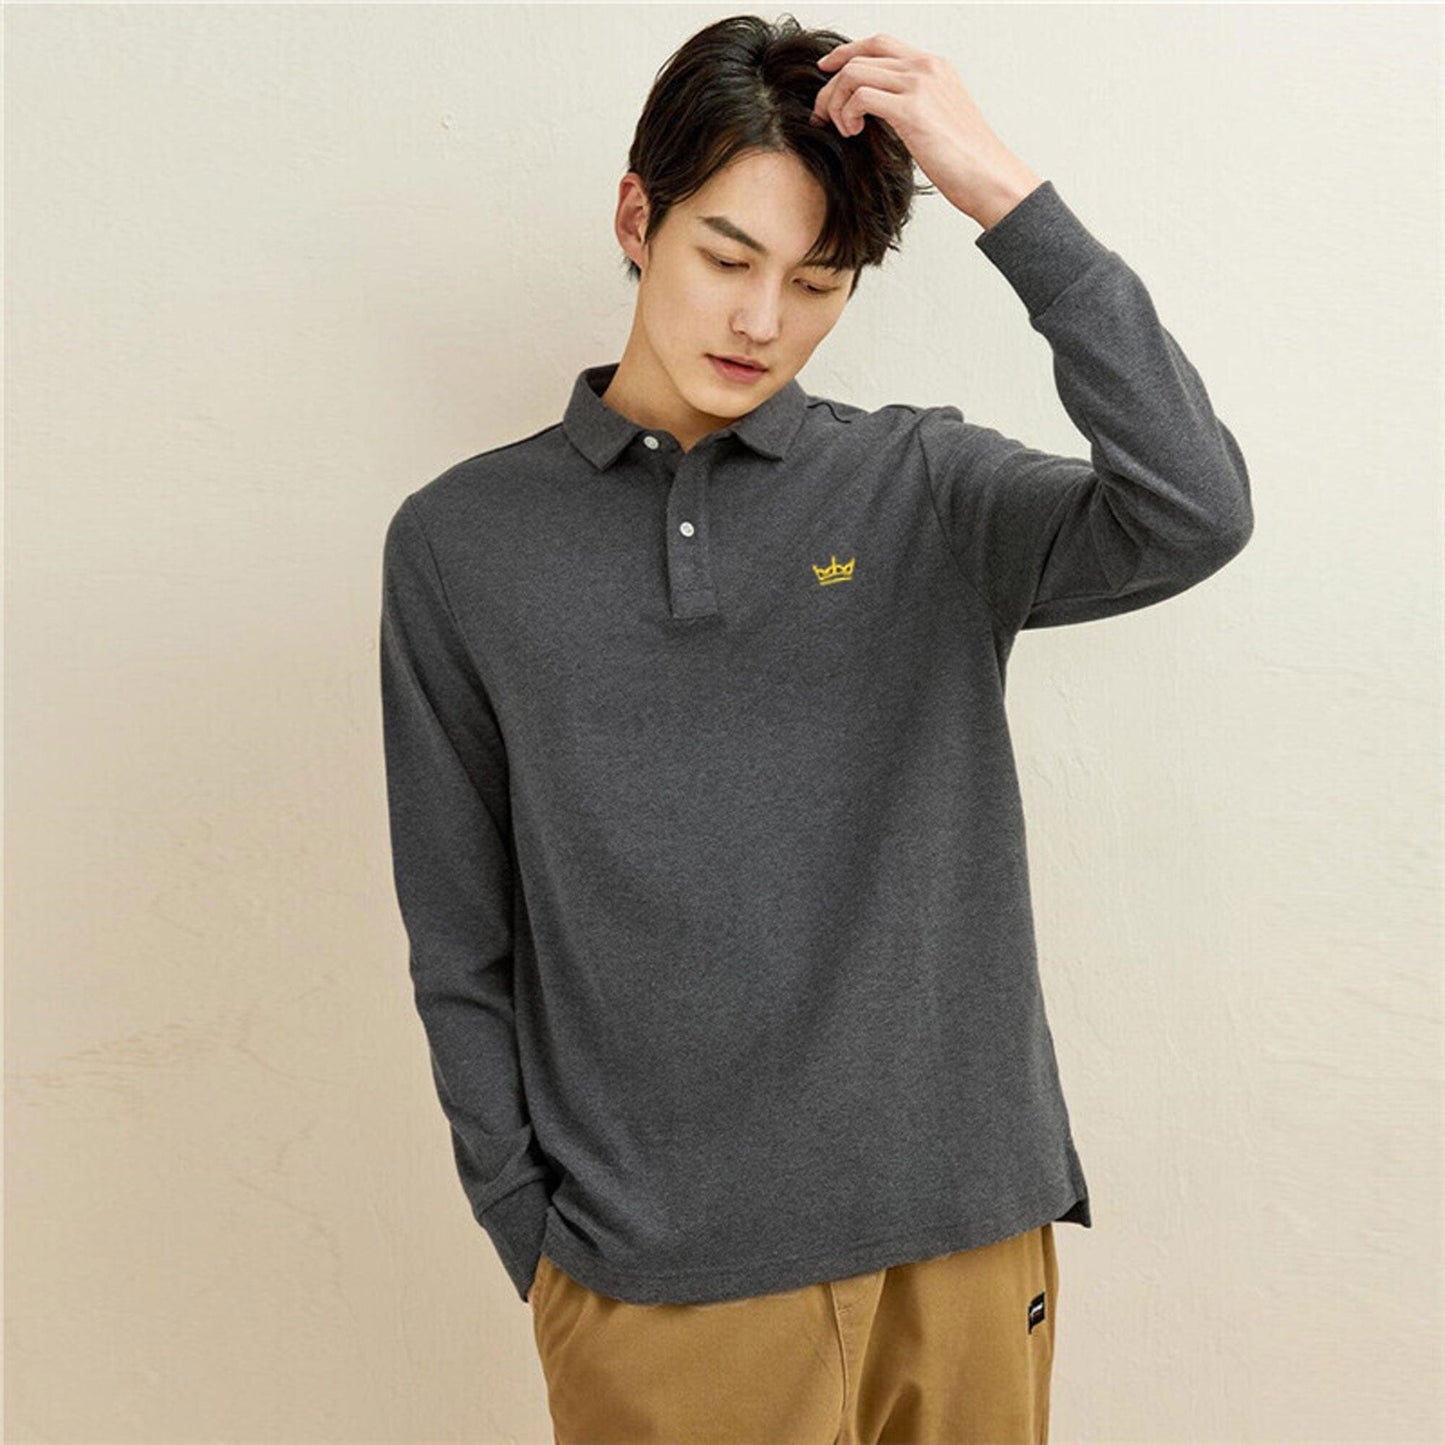 Industrialize Men's Crown Embroidered Minor Fault Long Sleeve Polo Shirt Men's Polo Shirt IST Charcoal 2XS 